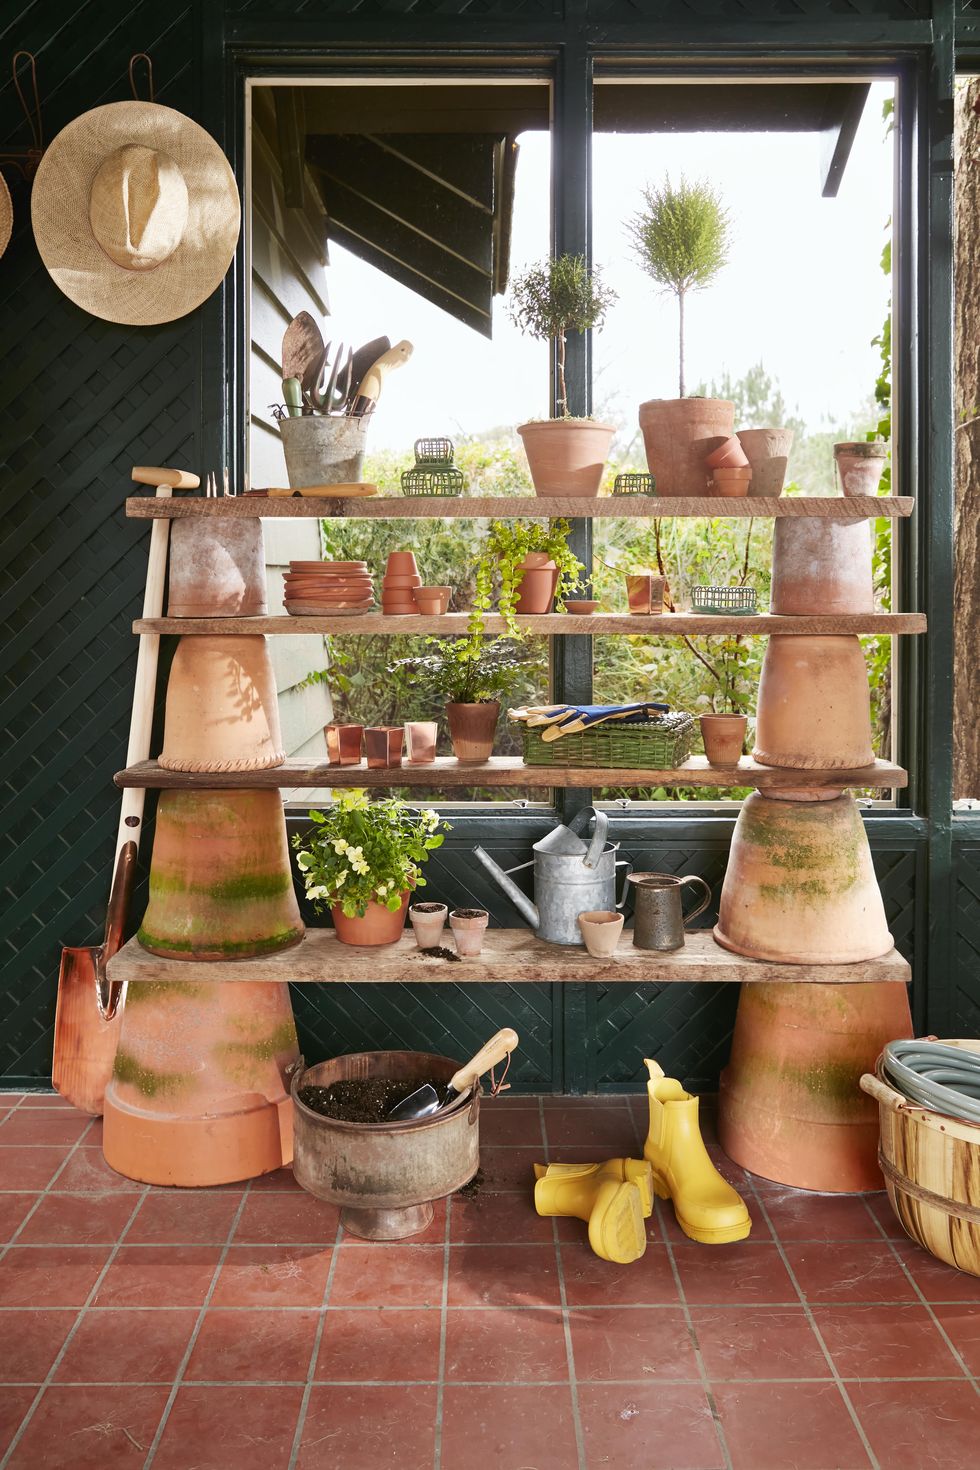 shelves made from terra cotta planters